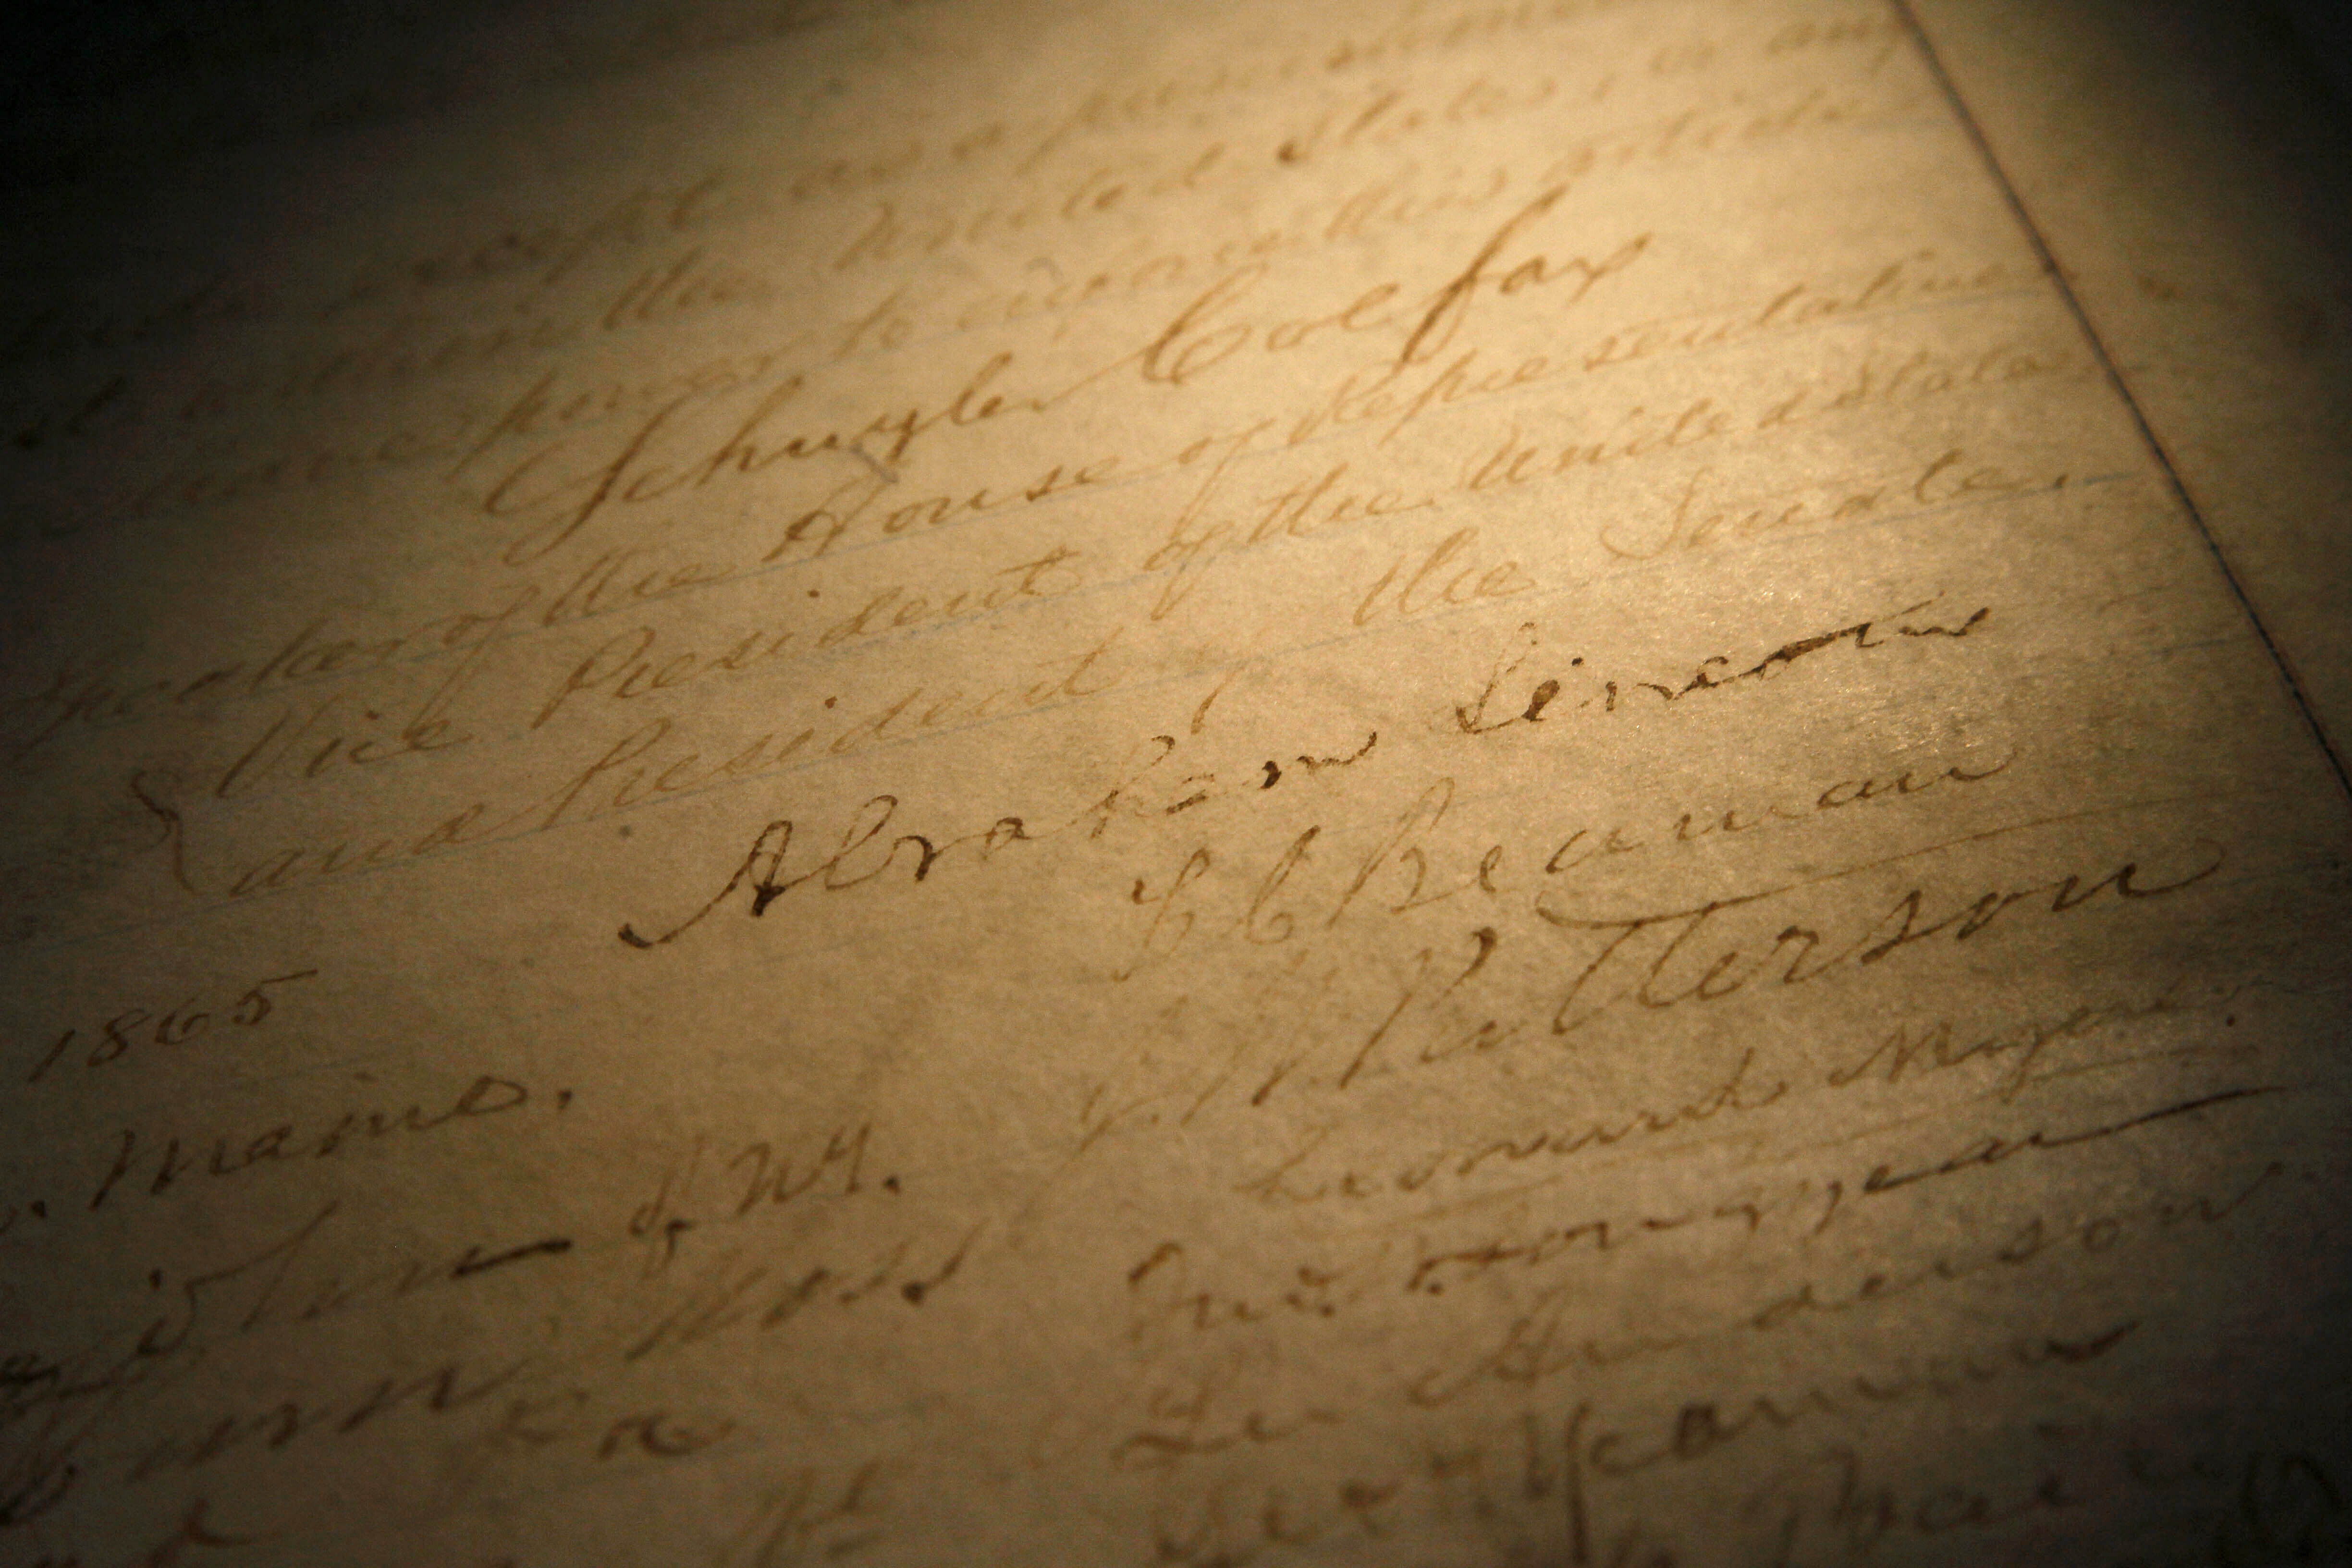 President Lincoln's signature can be seen on a rare, restored copy of the 13th Amendment that ended slavery.